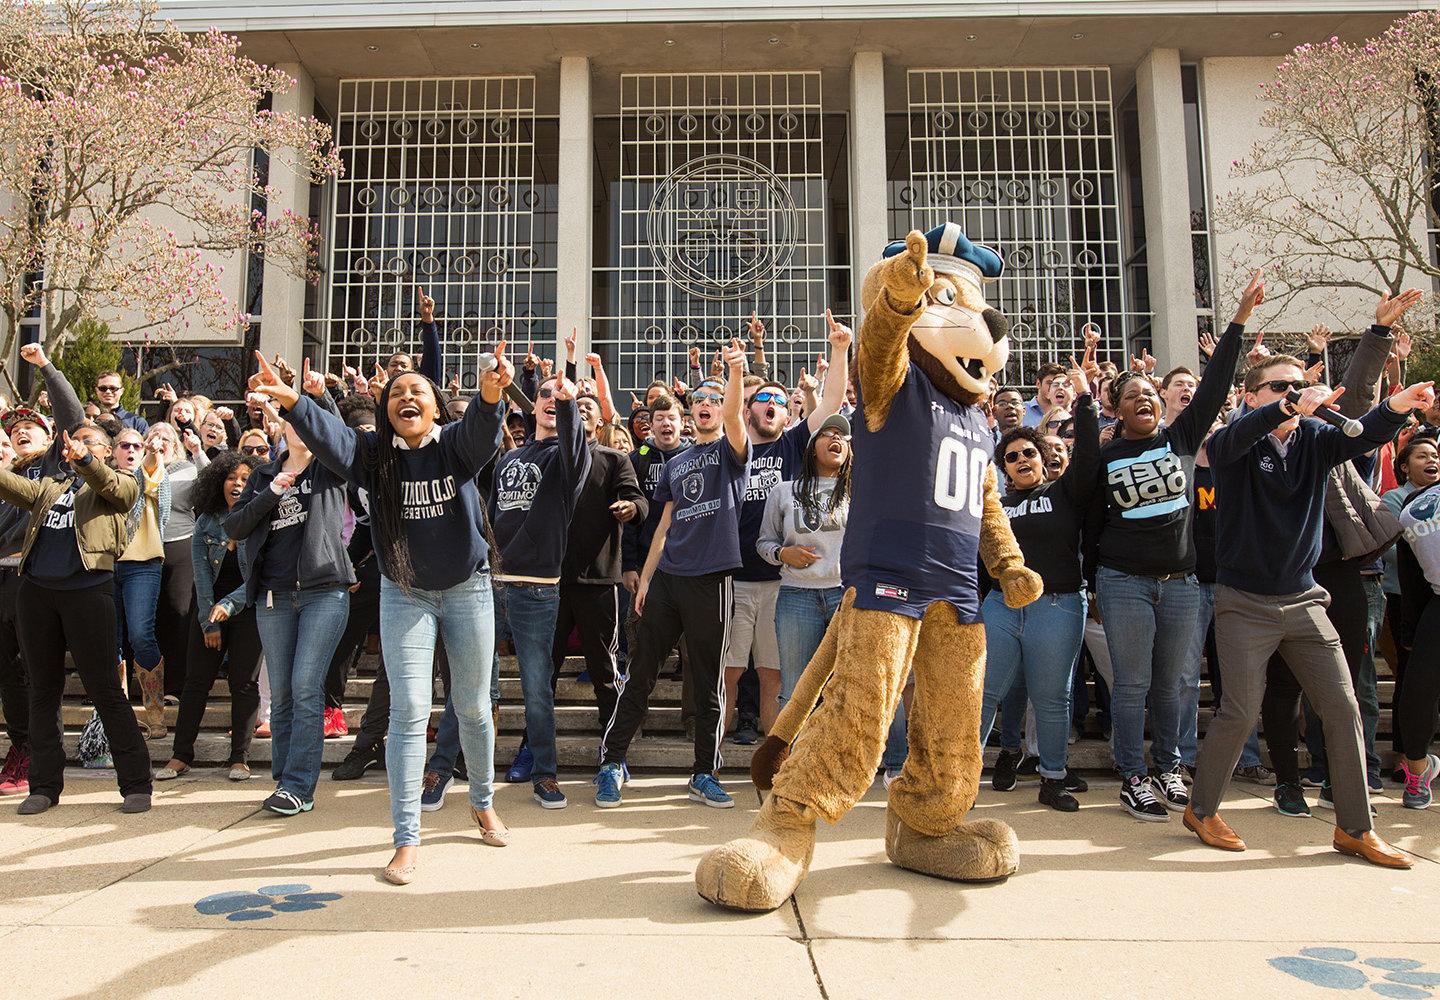 ODU students cheering with Big Blue mascot